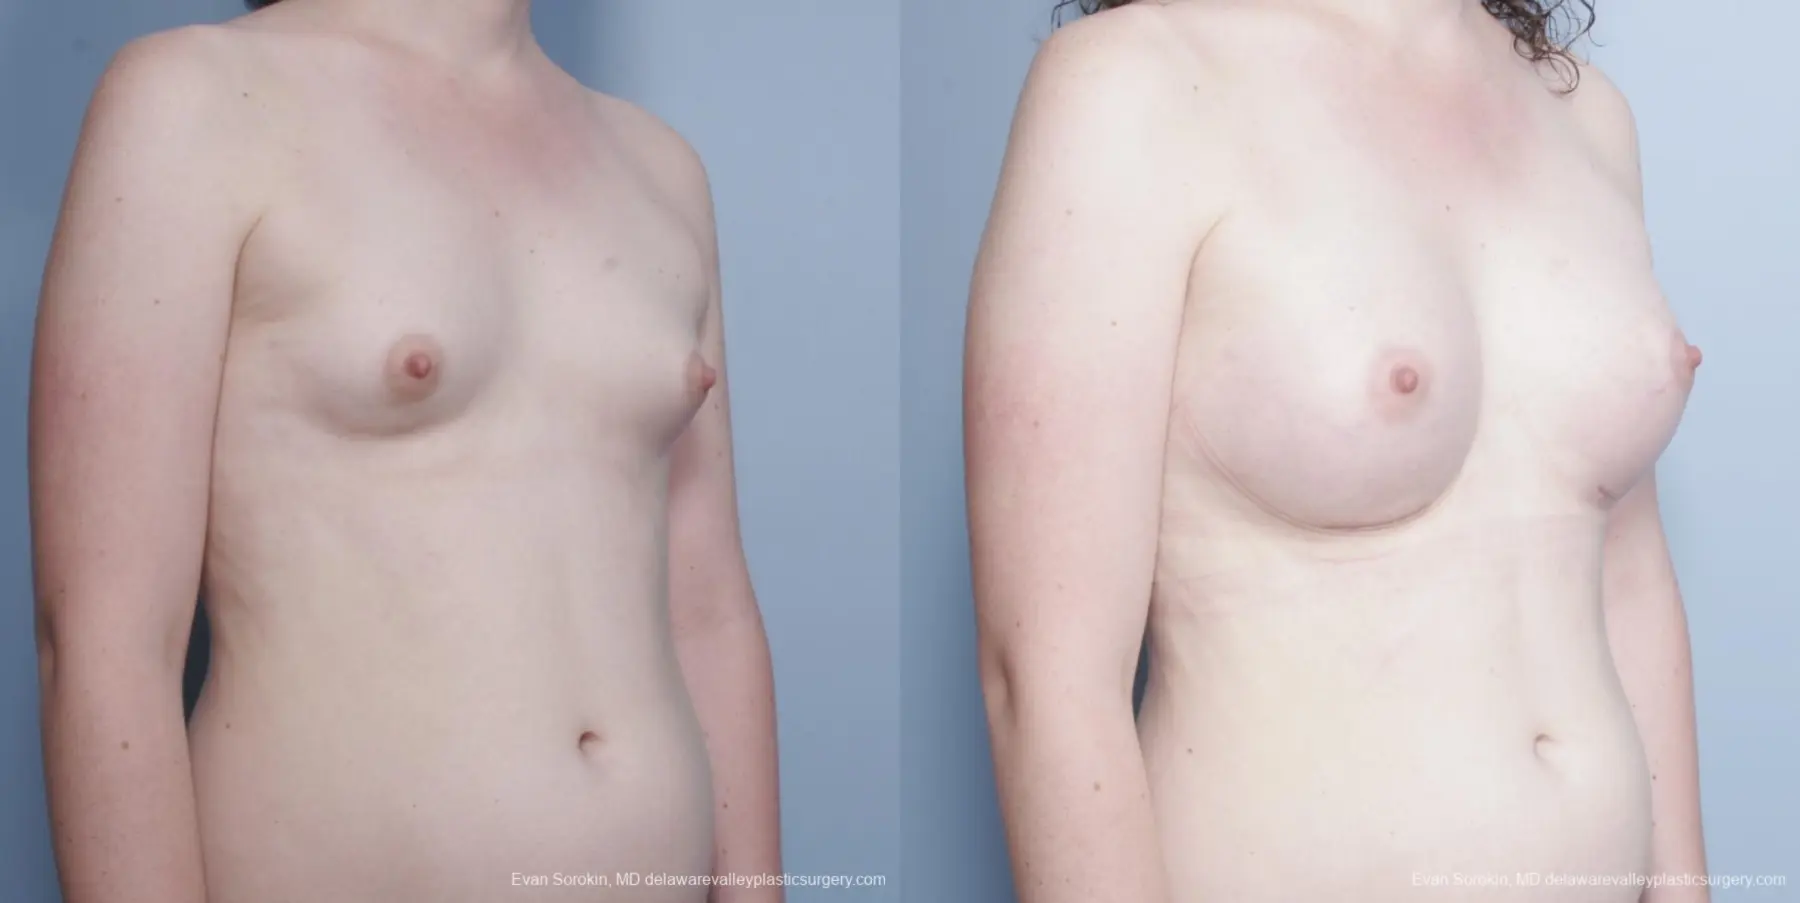 Philadelphia Top Surgery Male to Female 8642 - Before and After 2